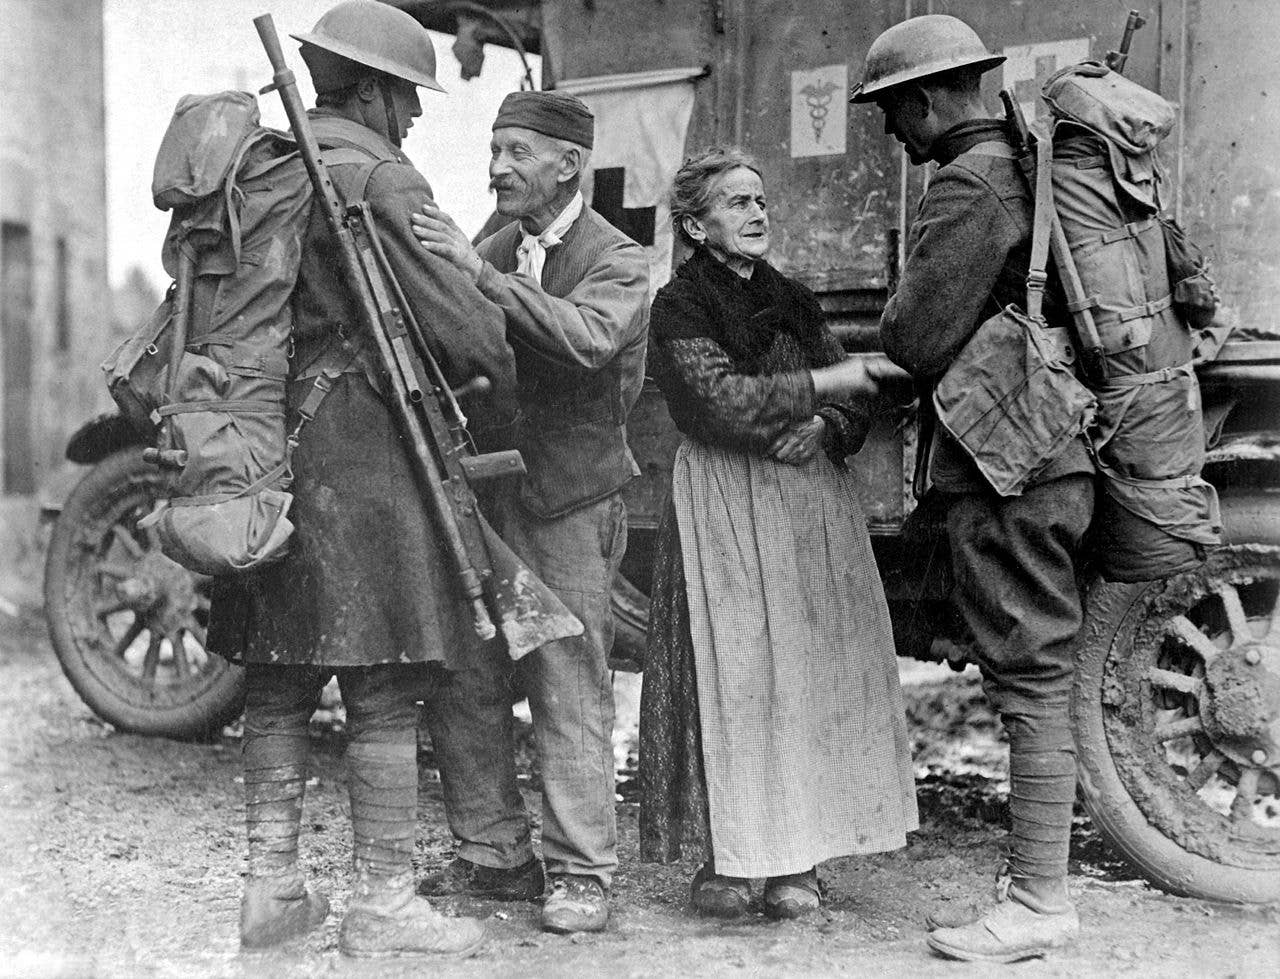 Soldiers of the American 308th and 166th Infantry Regiments liberate a French town in 1918. The soldier on the left is carrying a Chauchat slung over his shoulder. (Wikipedia)